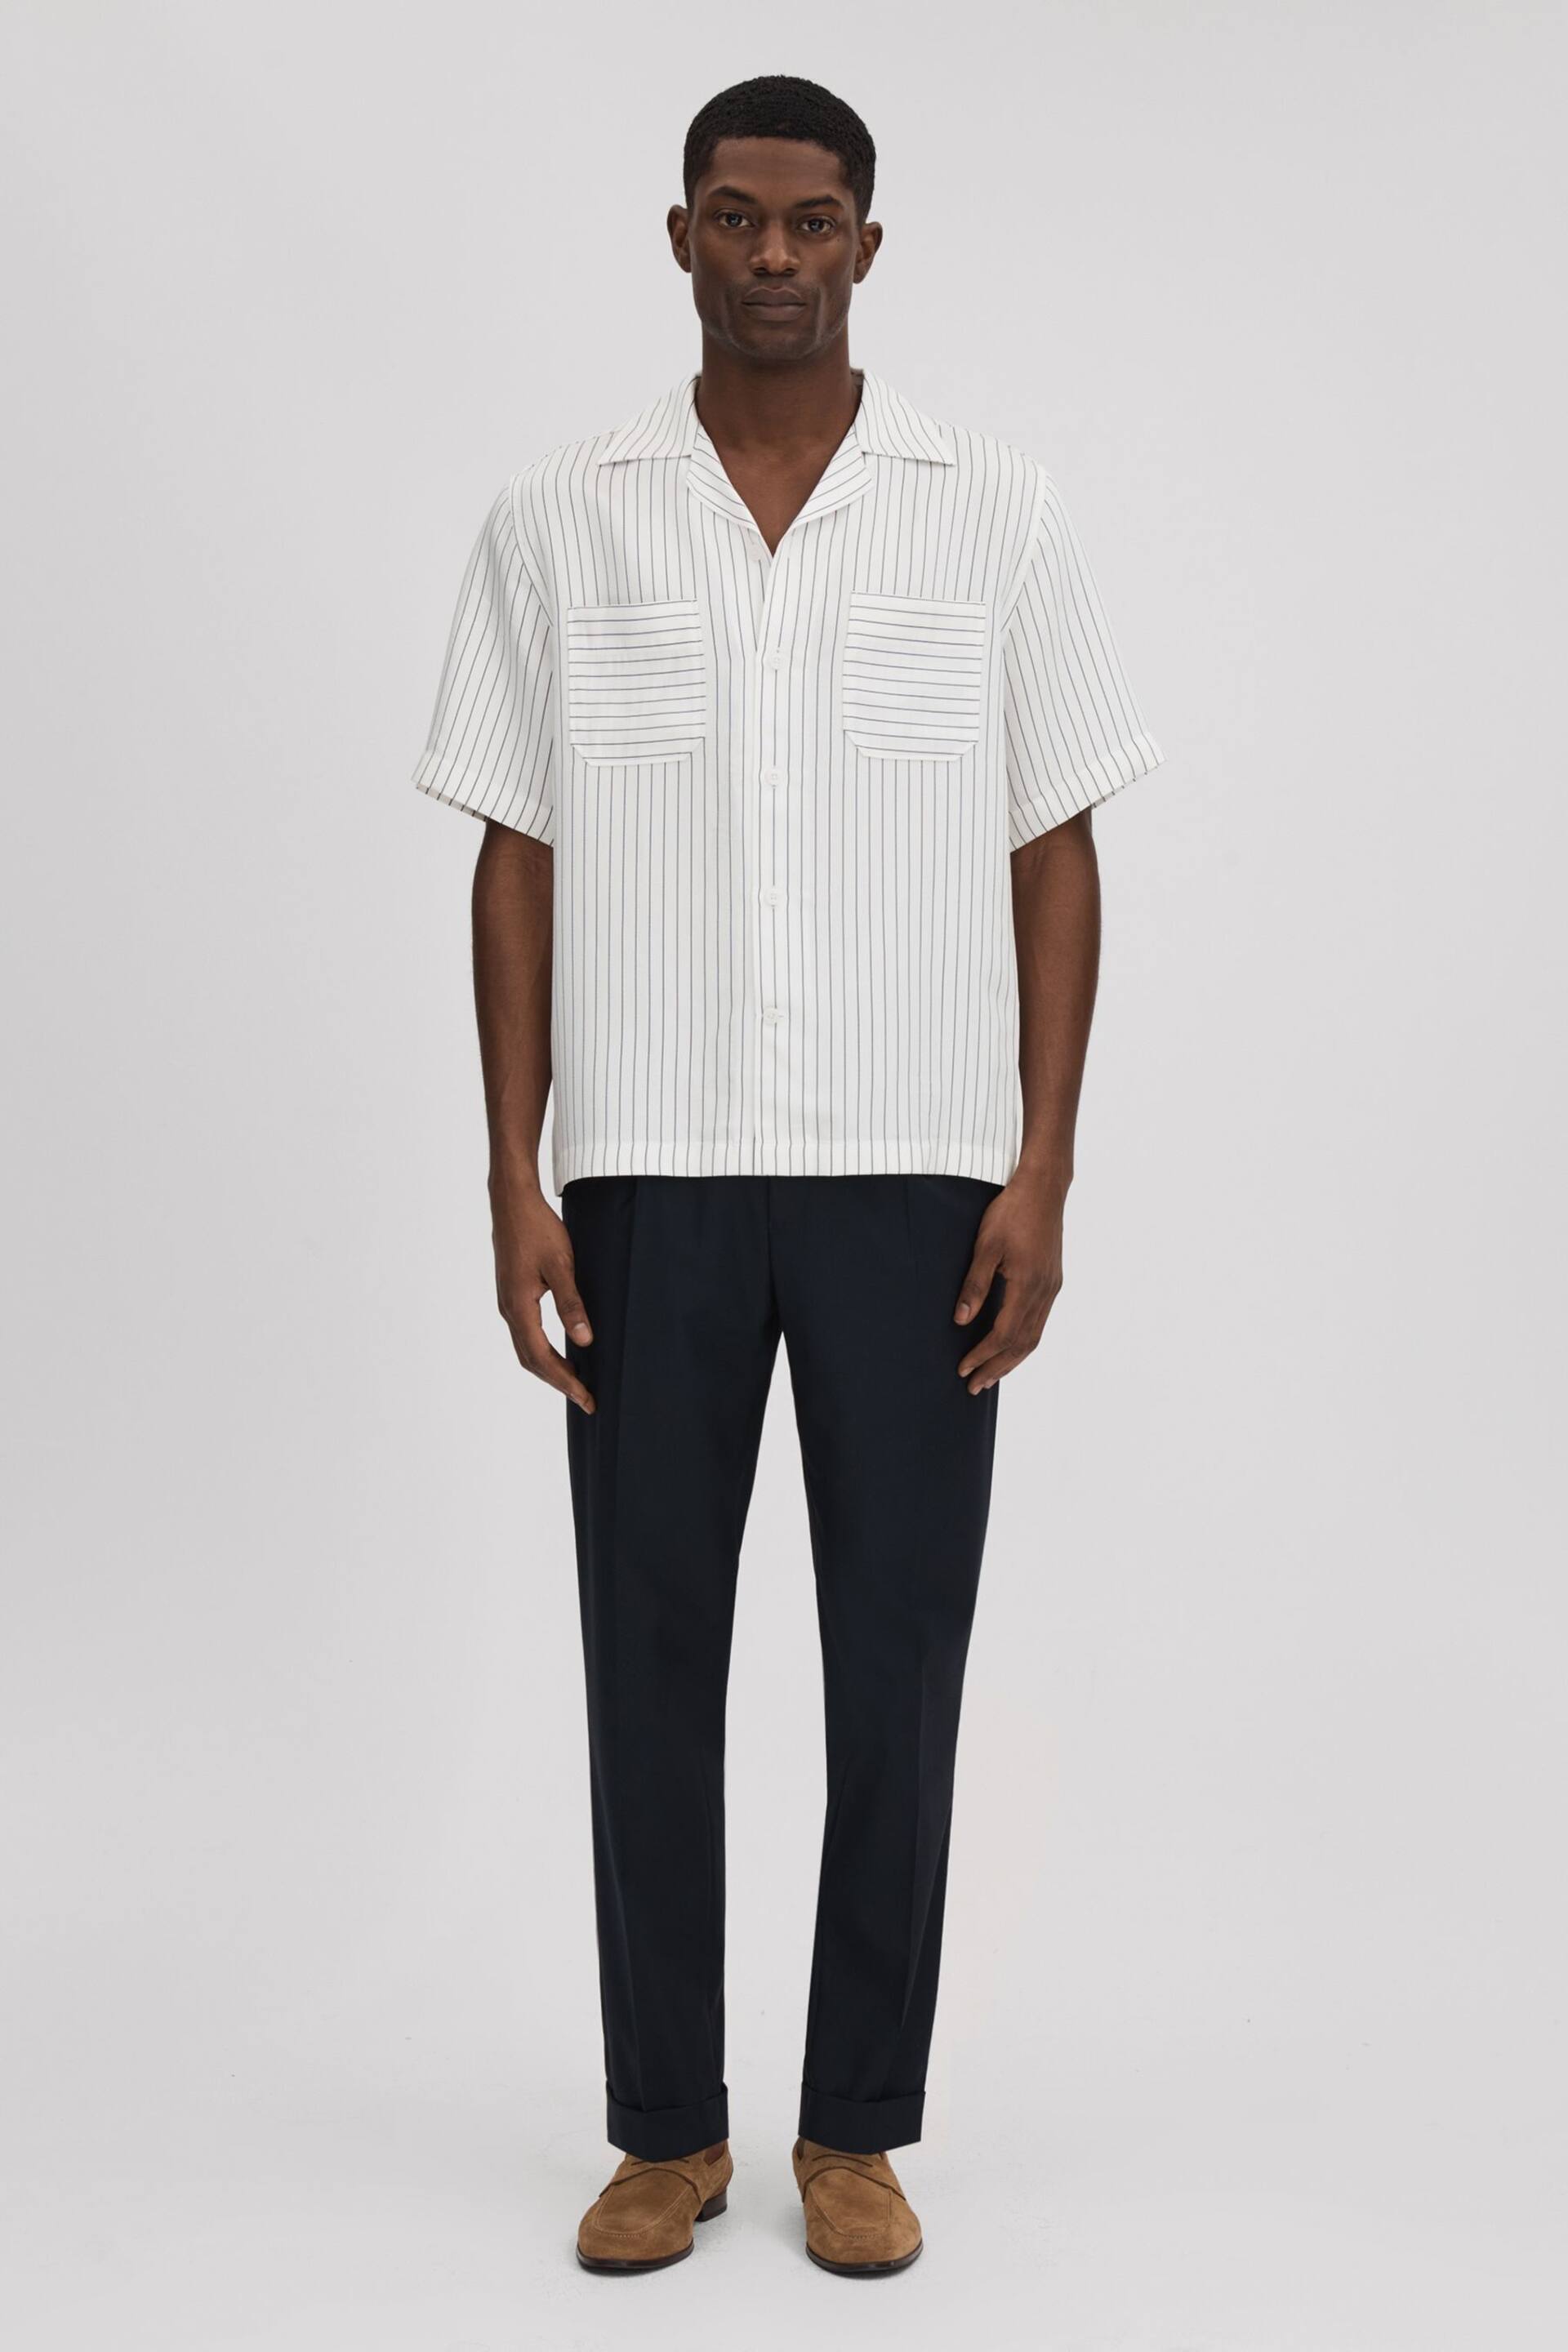 Reiss White/Navy Anchor Boxy Fit Striped Shirt - Image 3 of 6